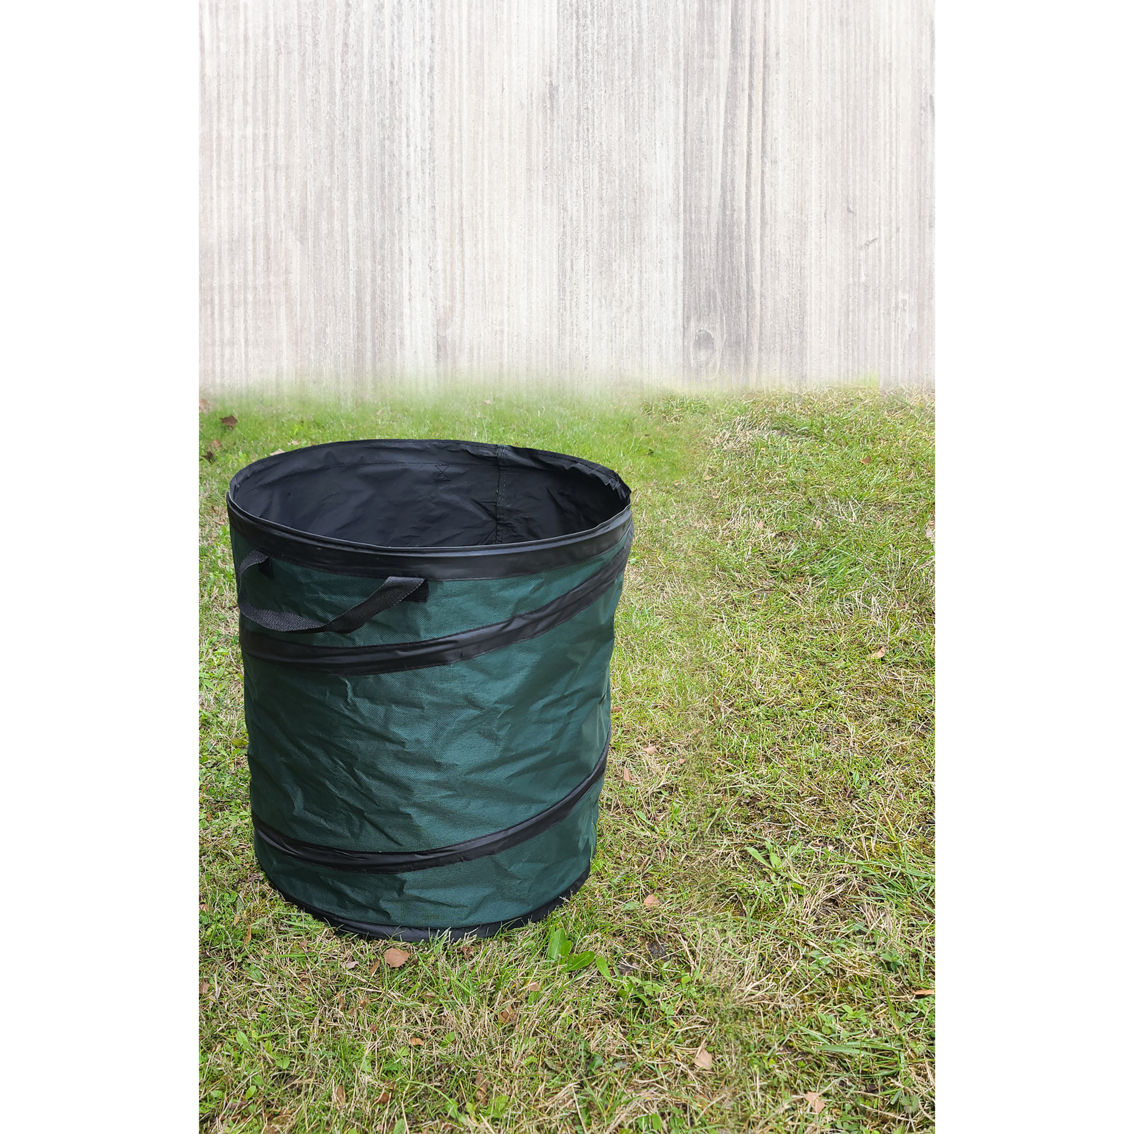 Dalen Pop-Up Garden Bags Collapsable Yardwork Containers 2 pk. - Image 2 of 2